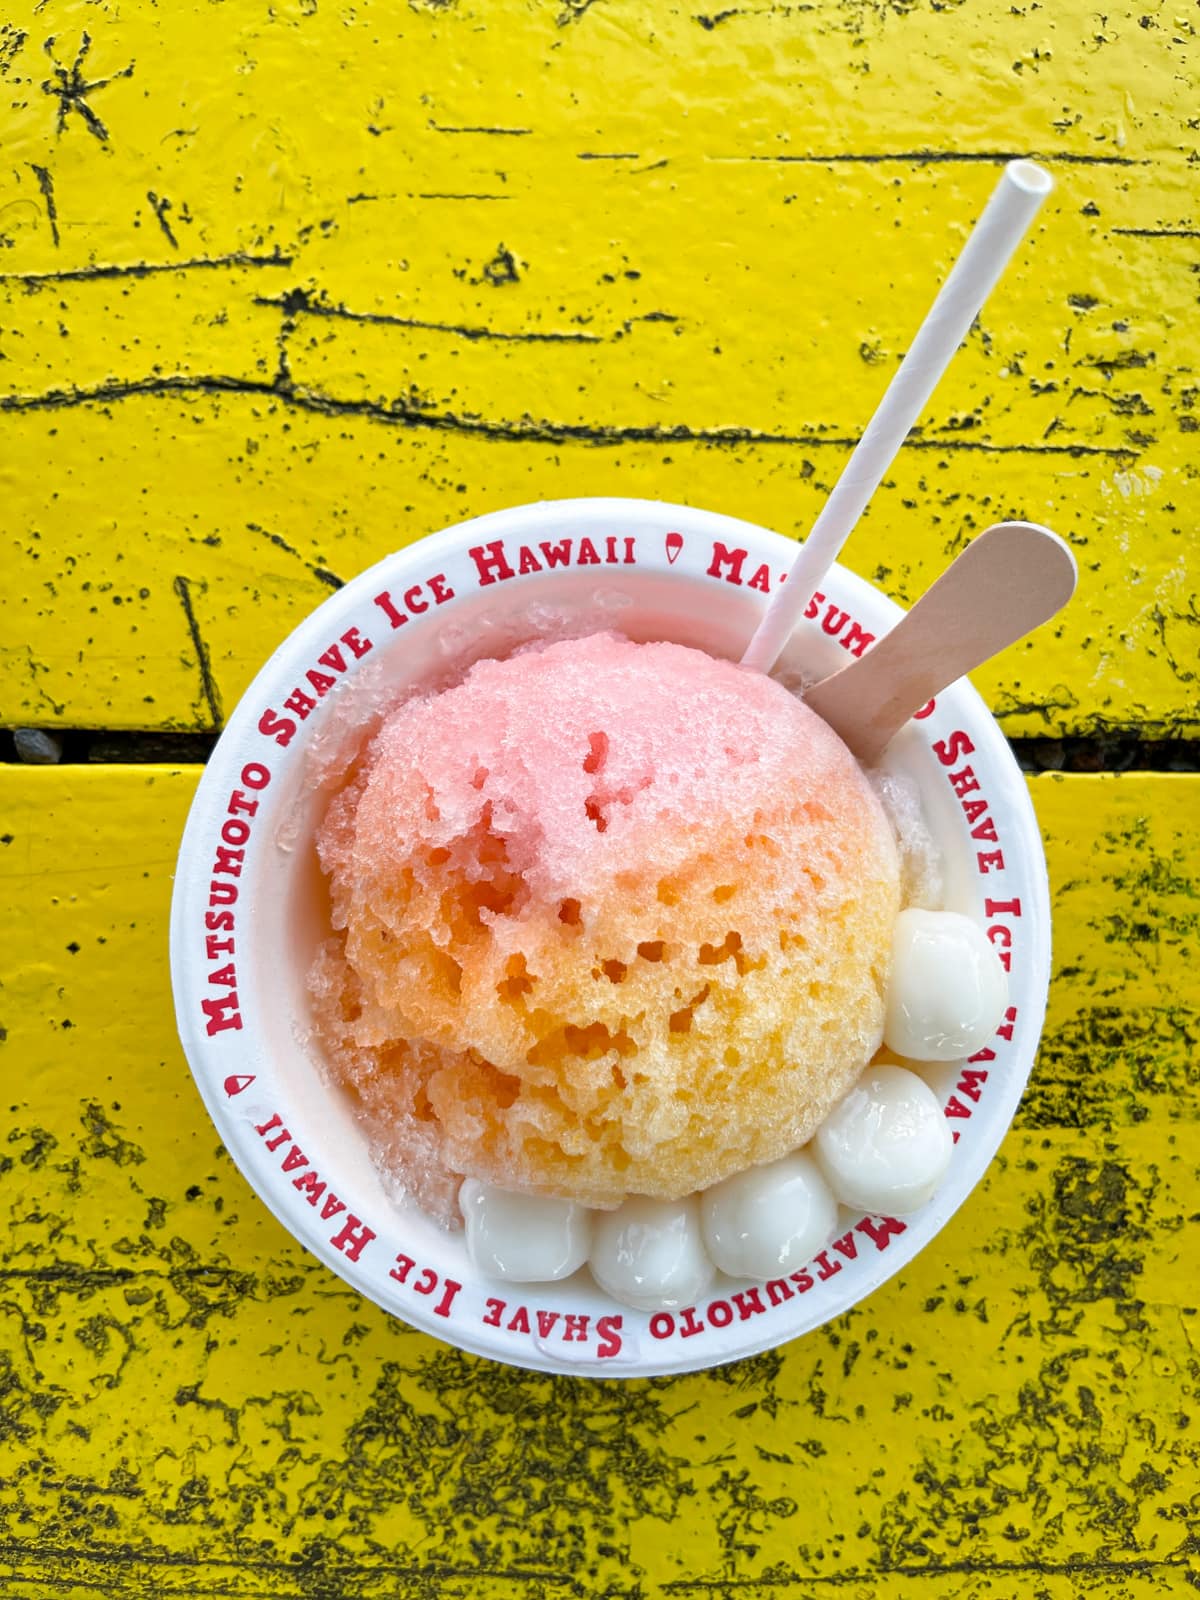 Tropical shave ice with mochi.